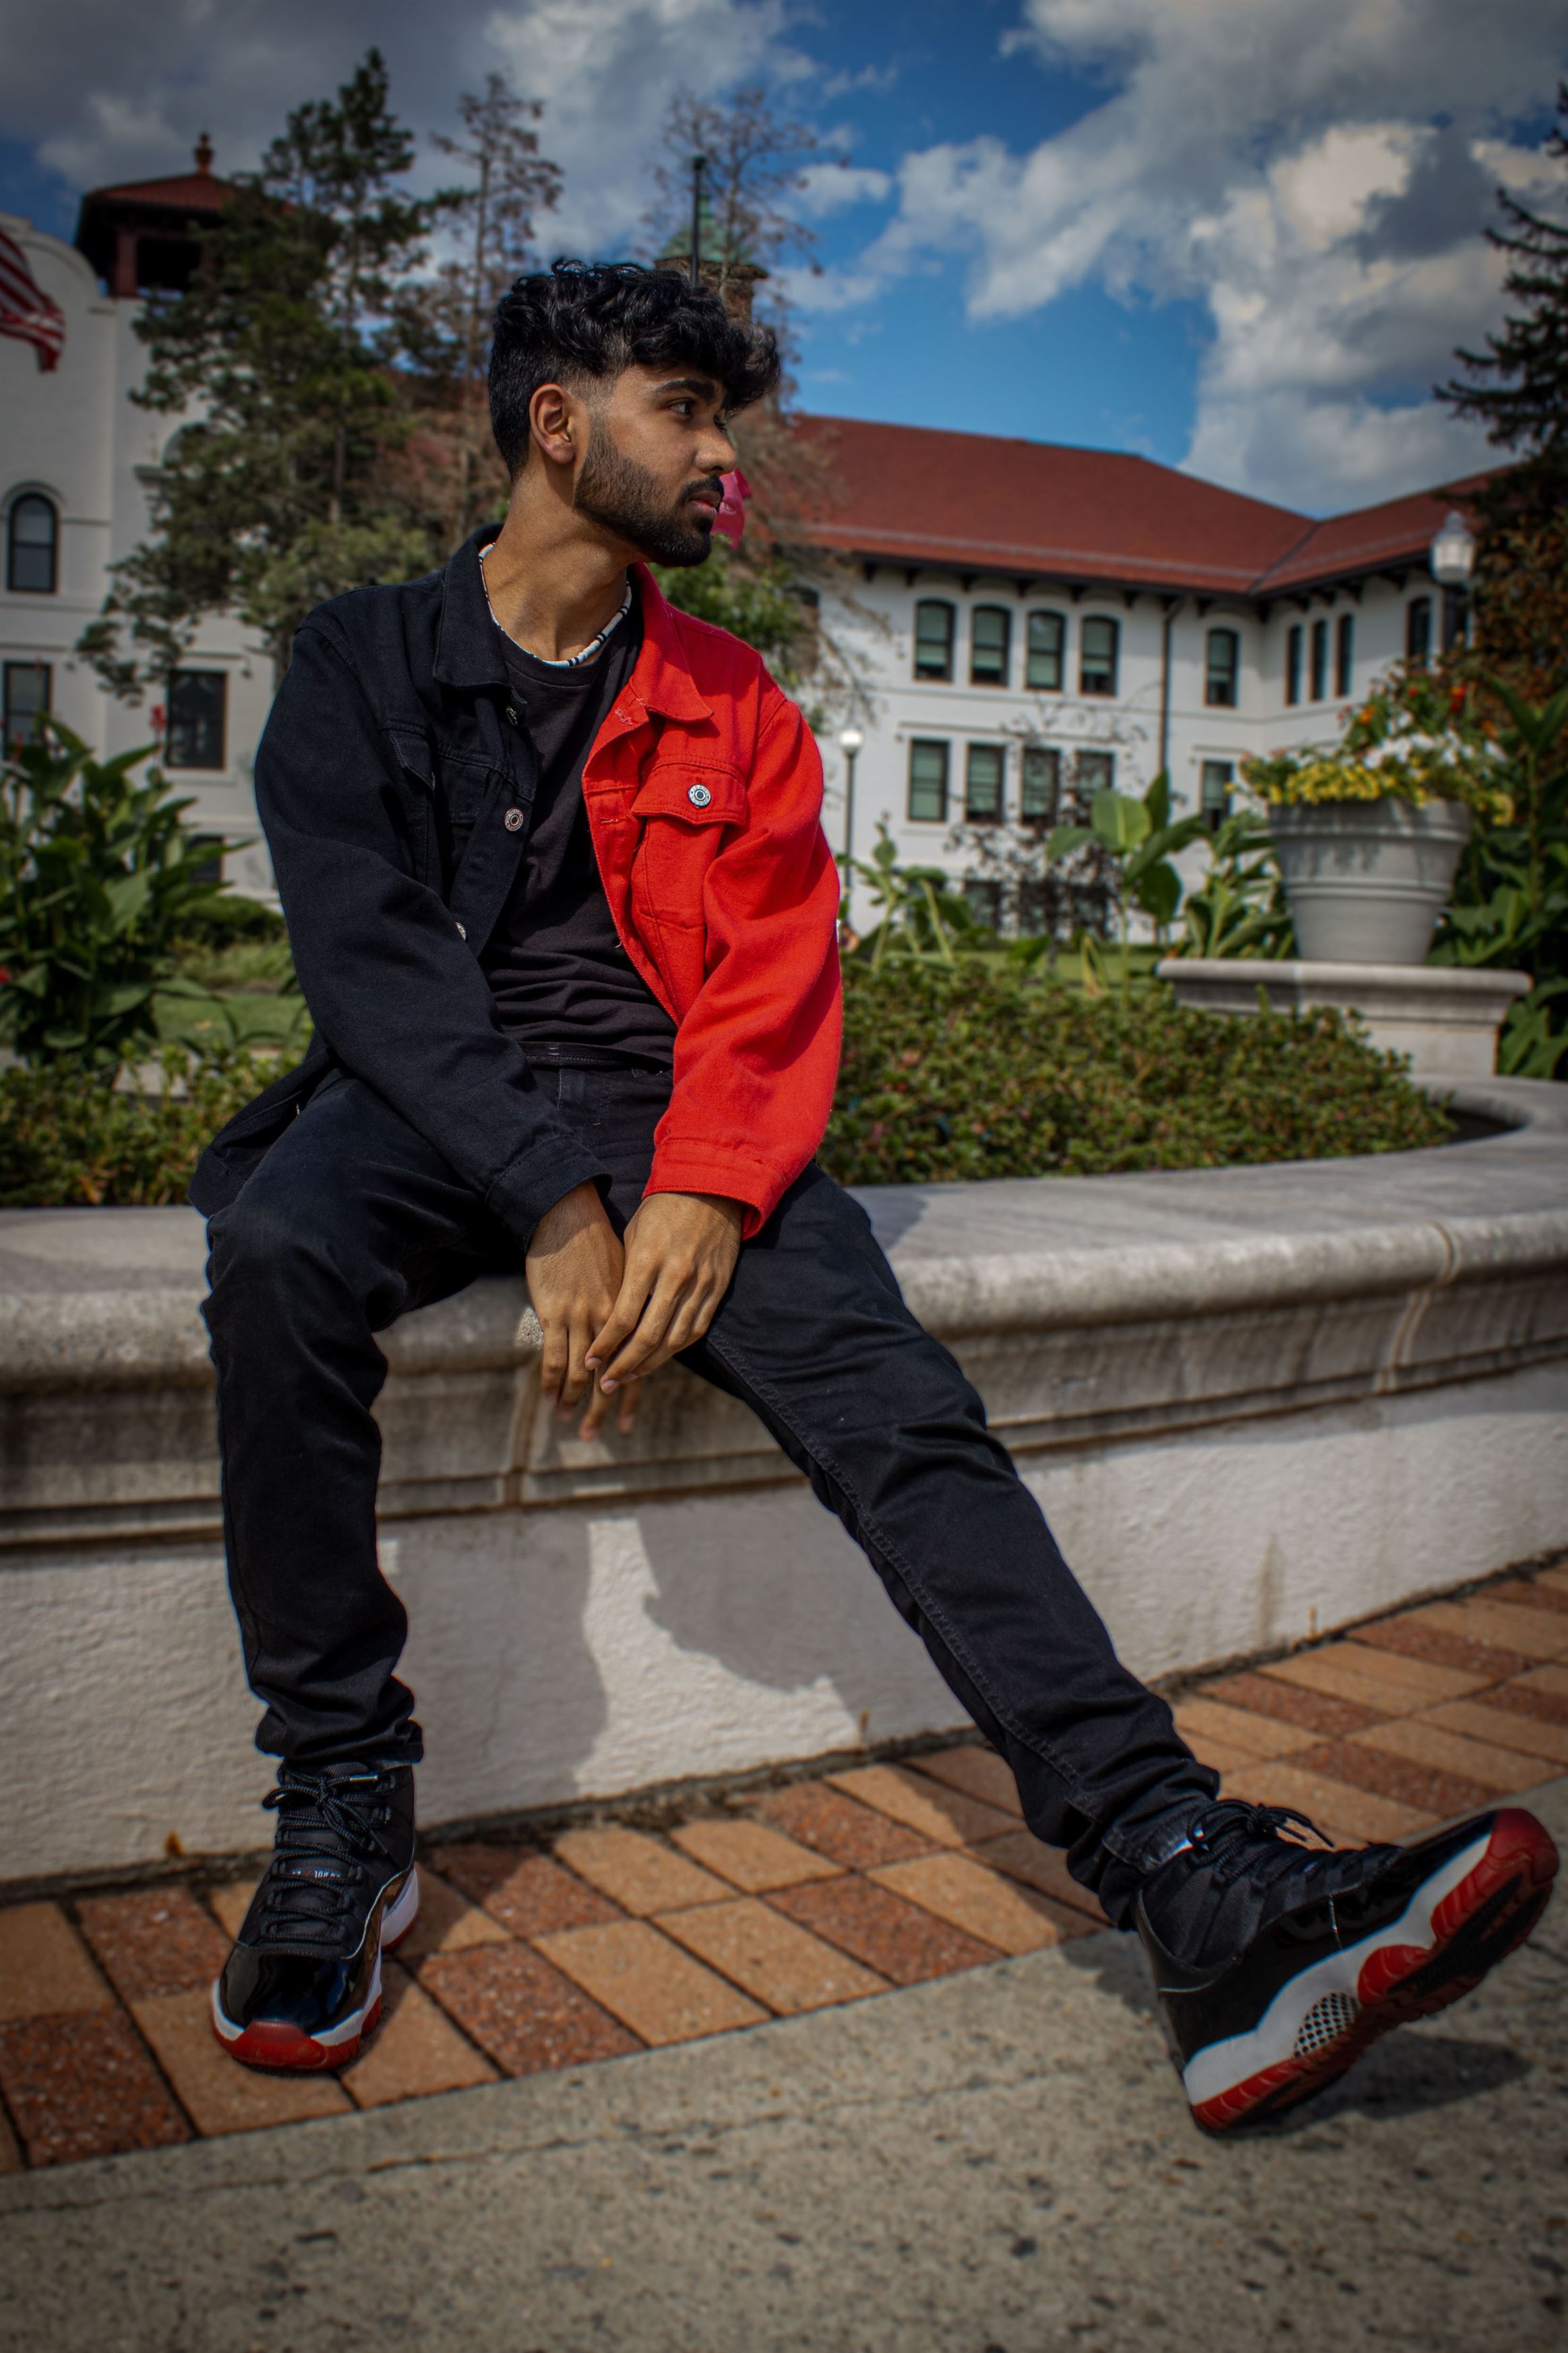 Mohamed Shahzaib, freshman biochemistry major, goes for an all black and red look.